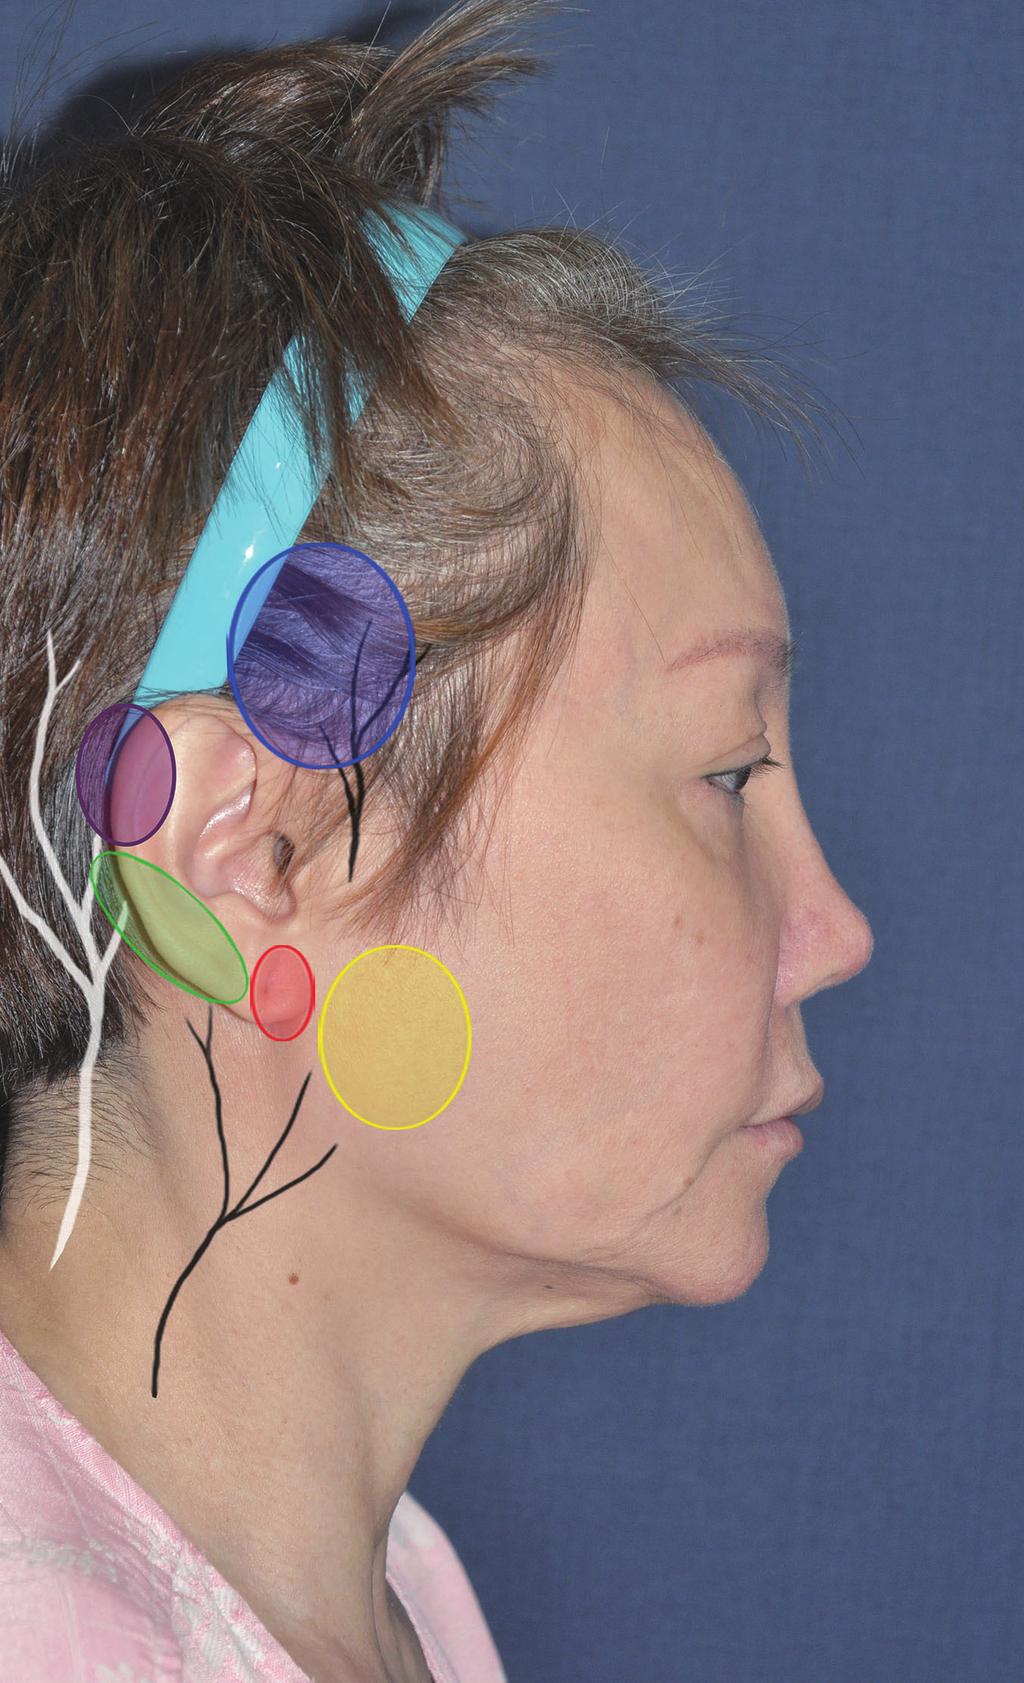 Lee JH et al. Preventing periauricular paresthesia Fig. 1. Sensory distribution of the periauricular area Fig. 2.